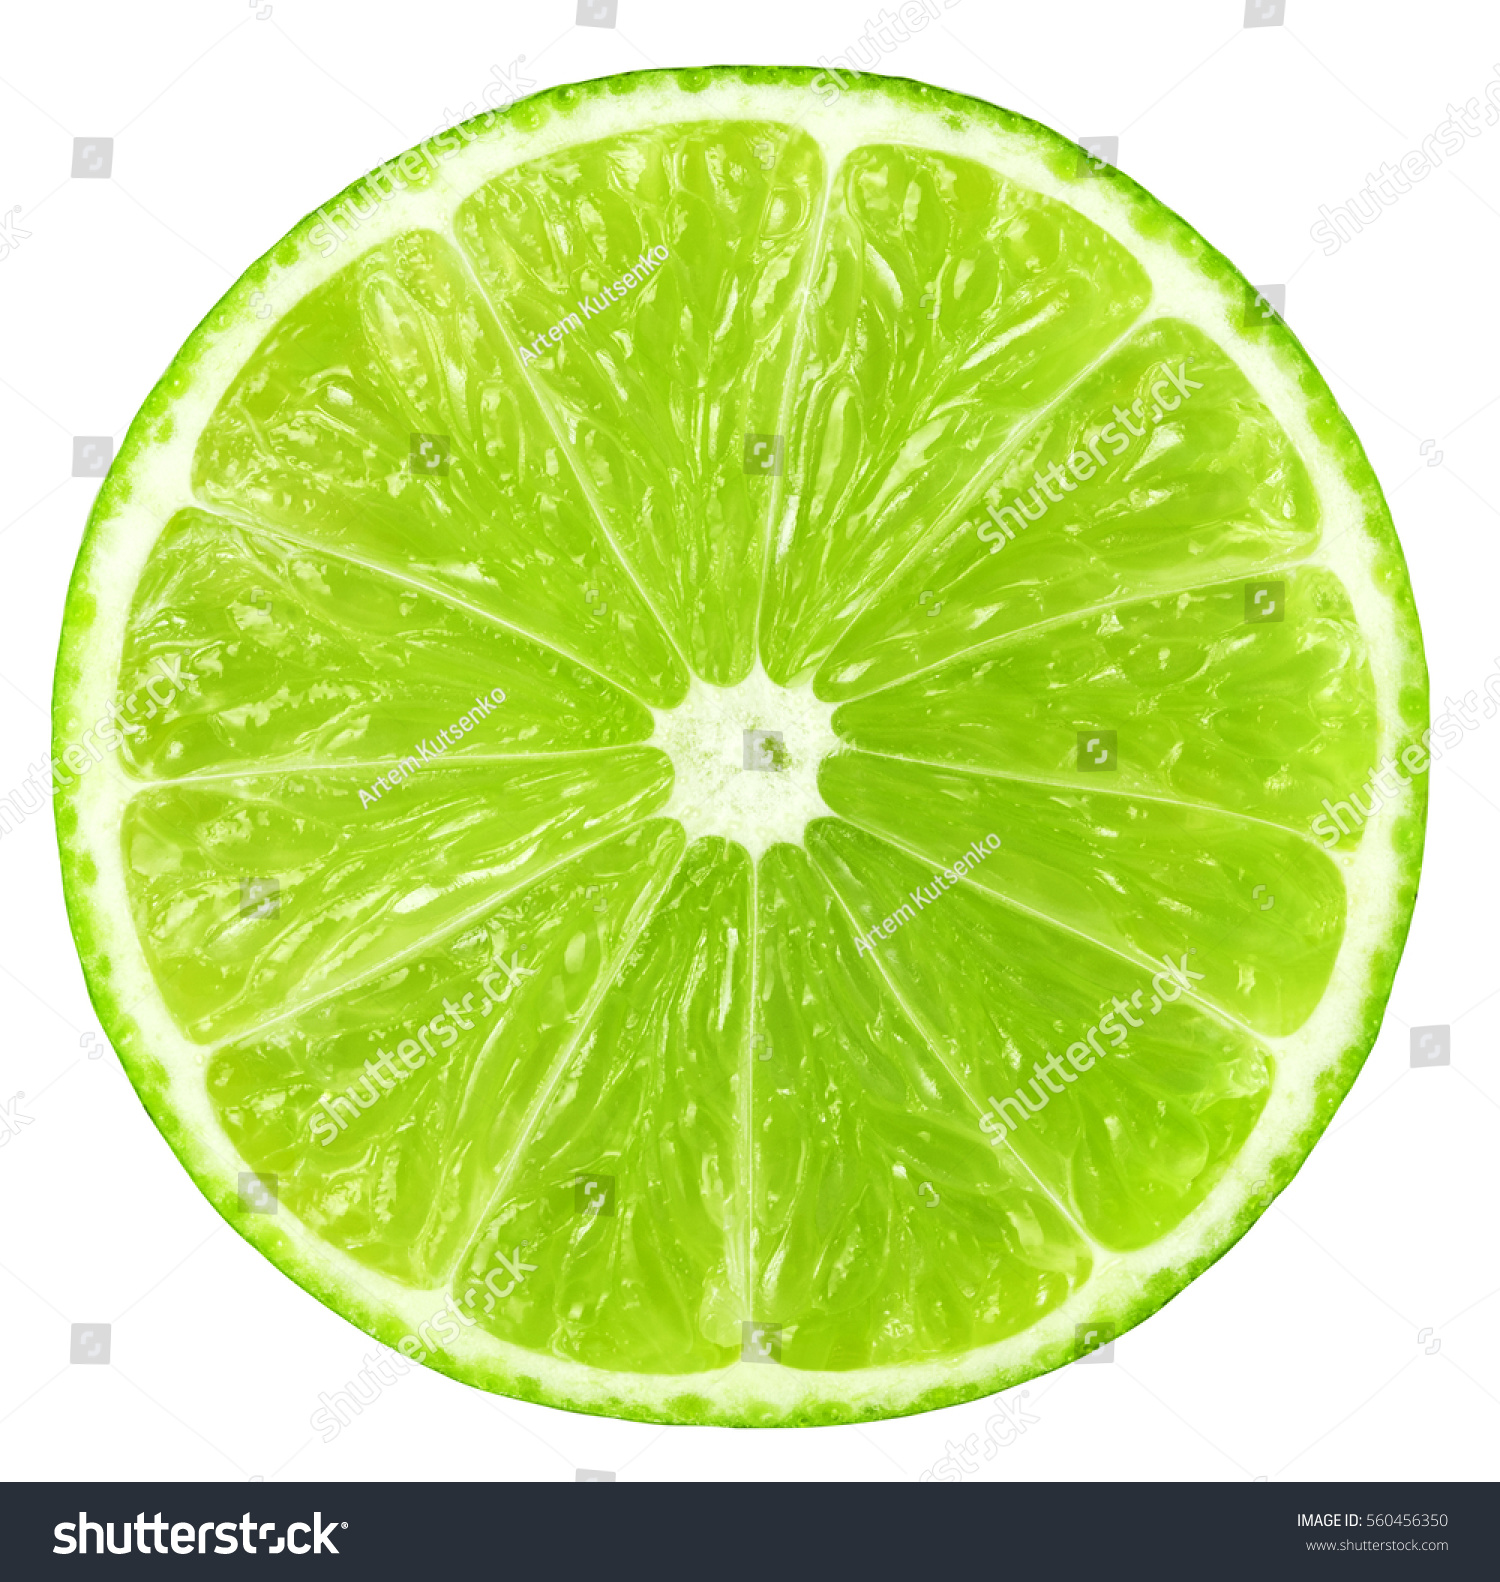 Juicy slice of lime isolated on white, with clipping path #560456350